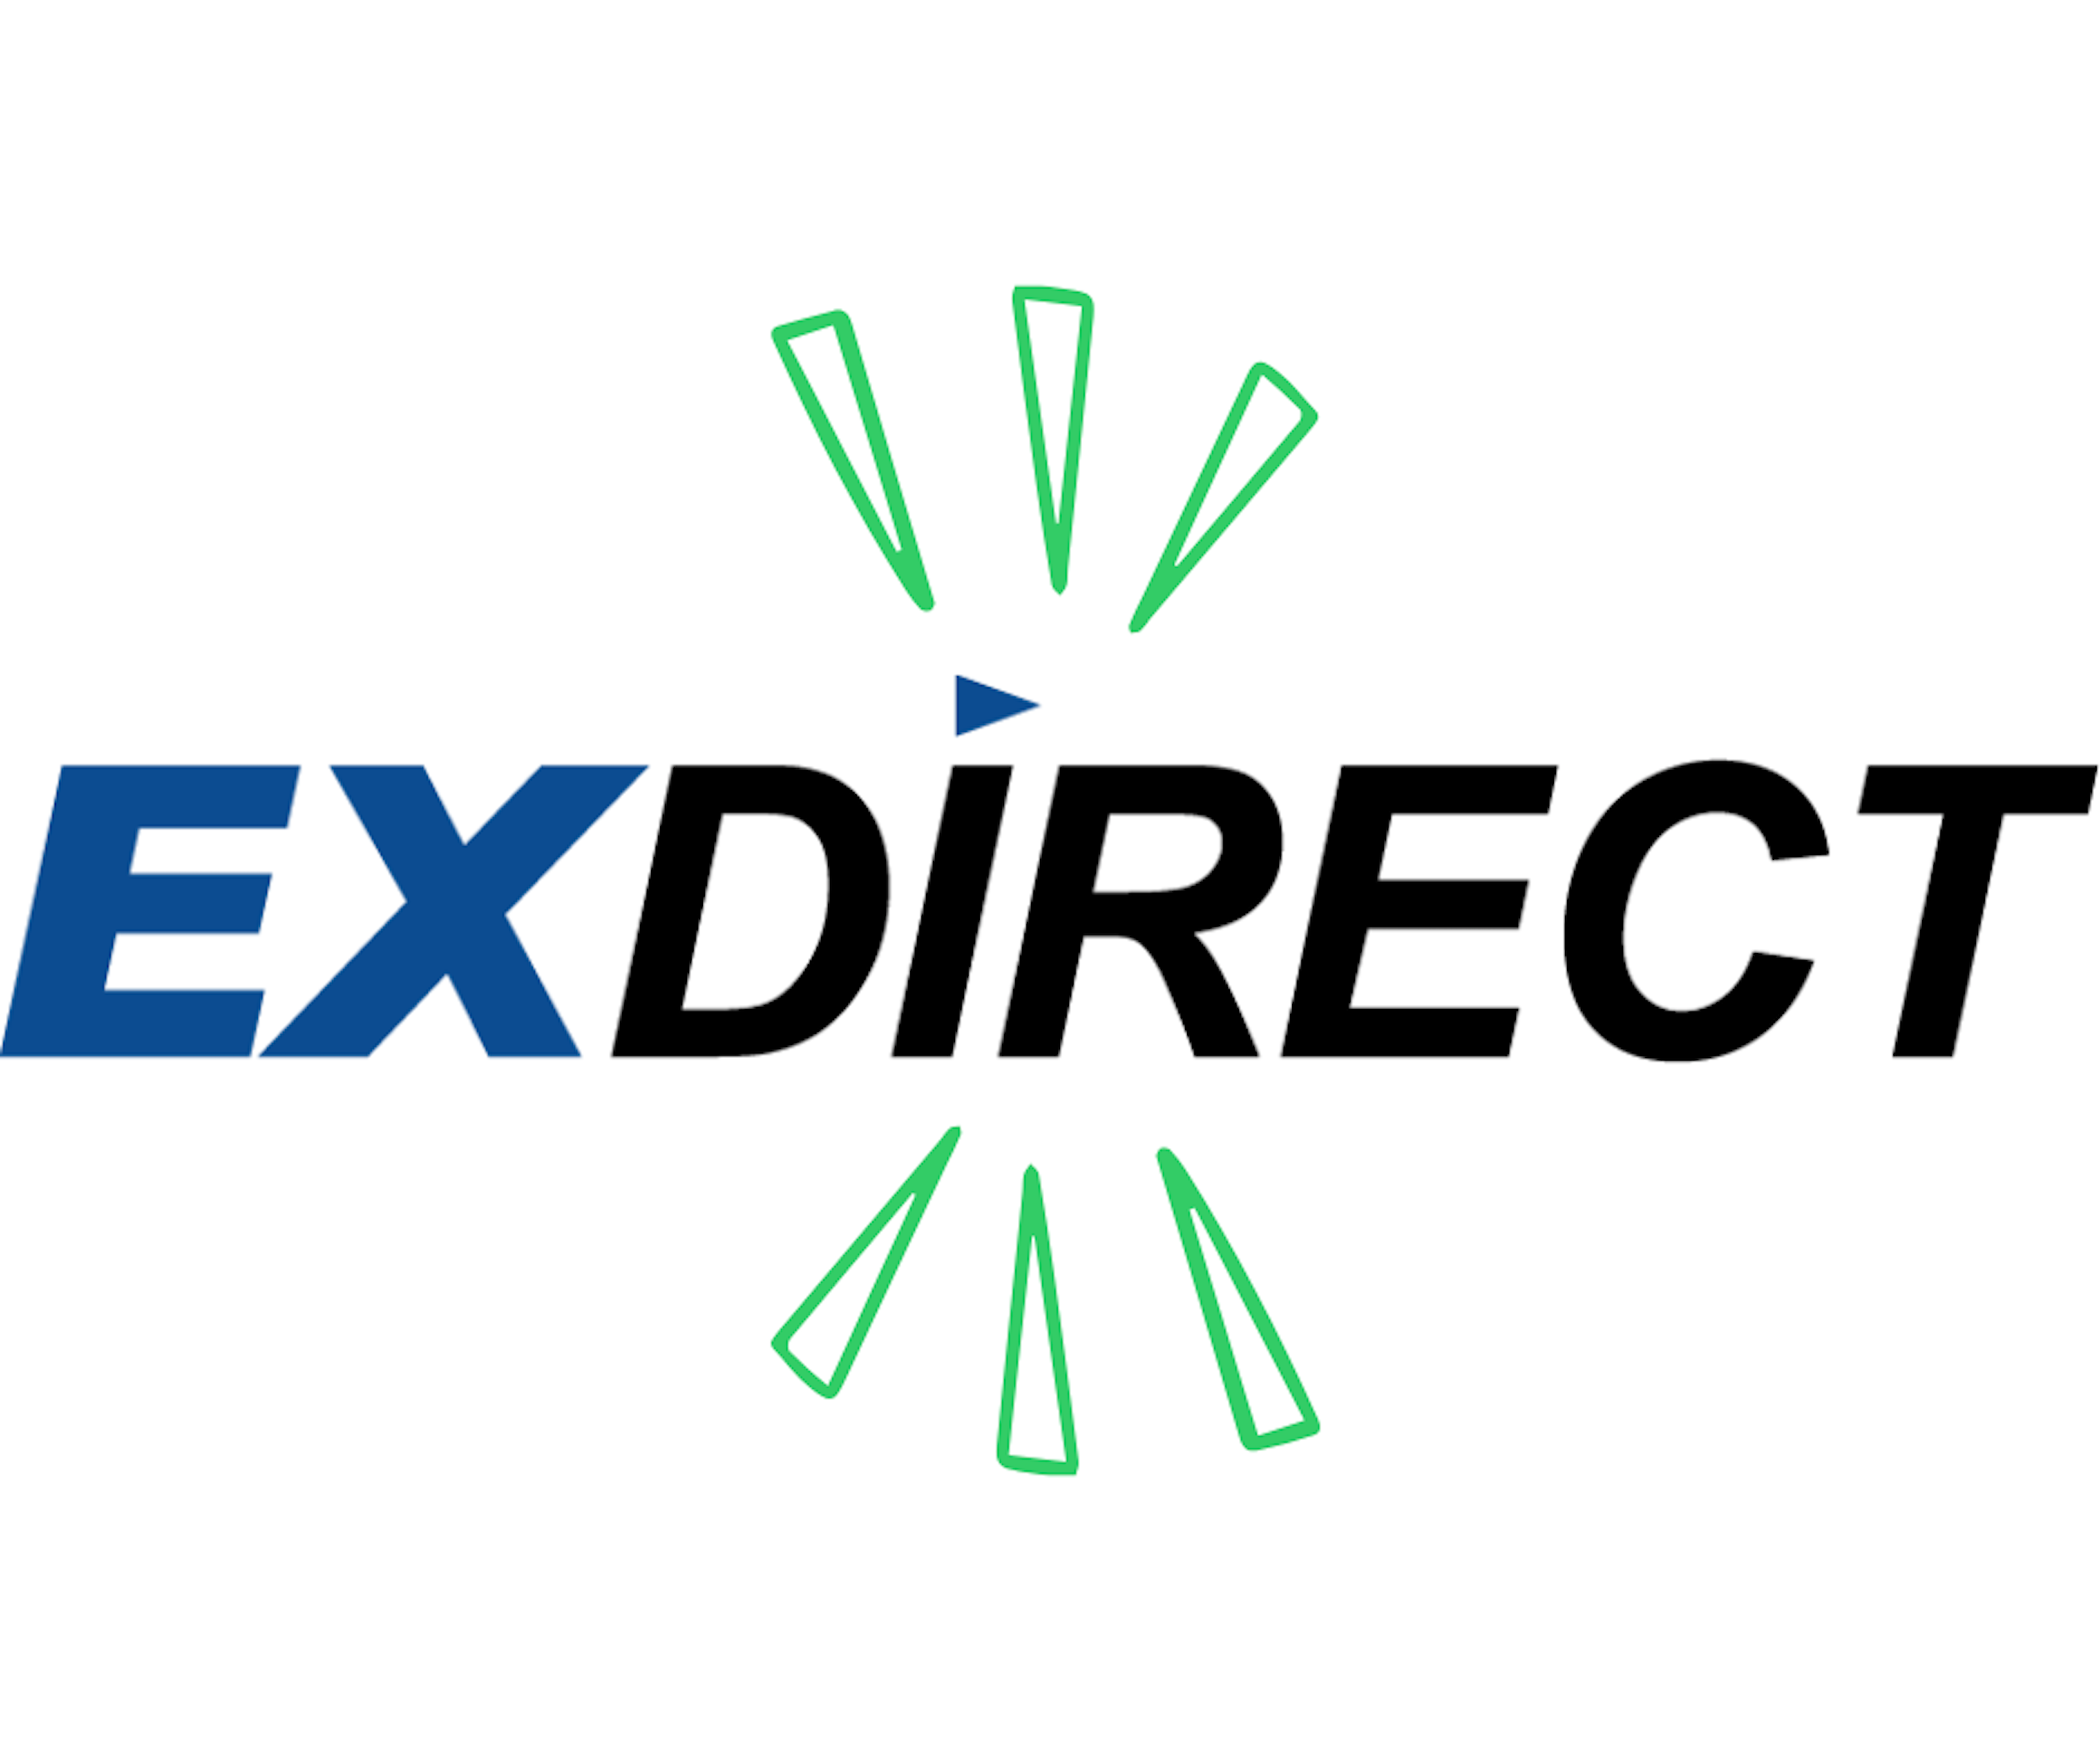 exdirect logo with a green doodle for emphasis